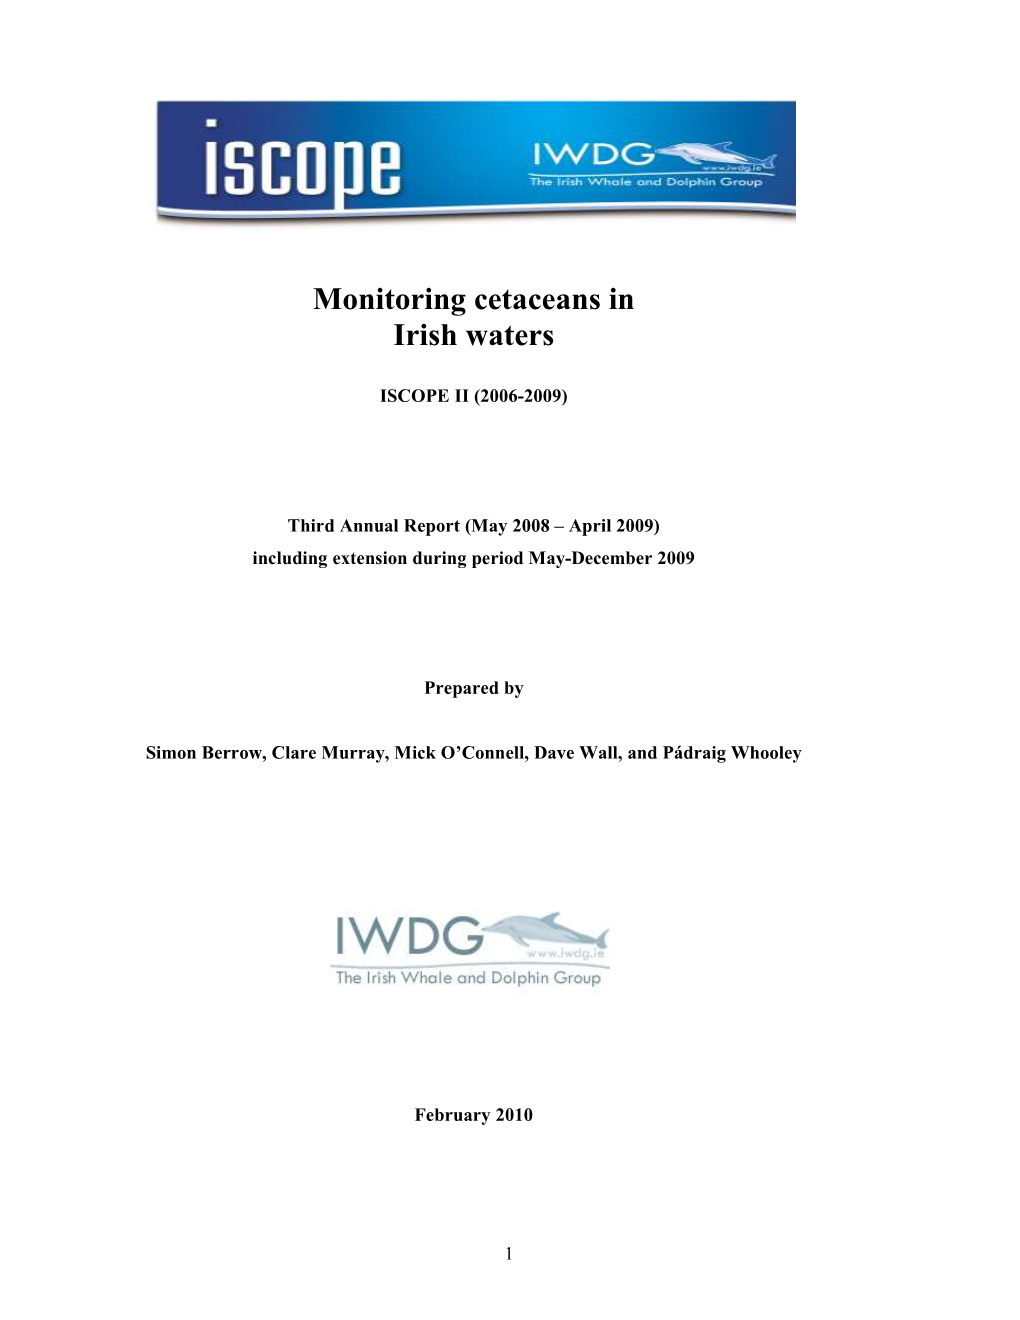 ISCOPE II Third Annual Report Incl Extension